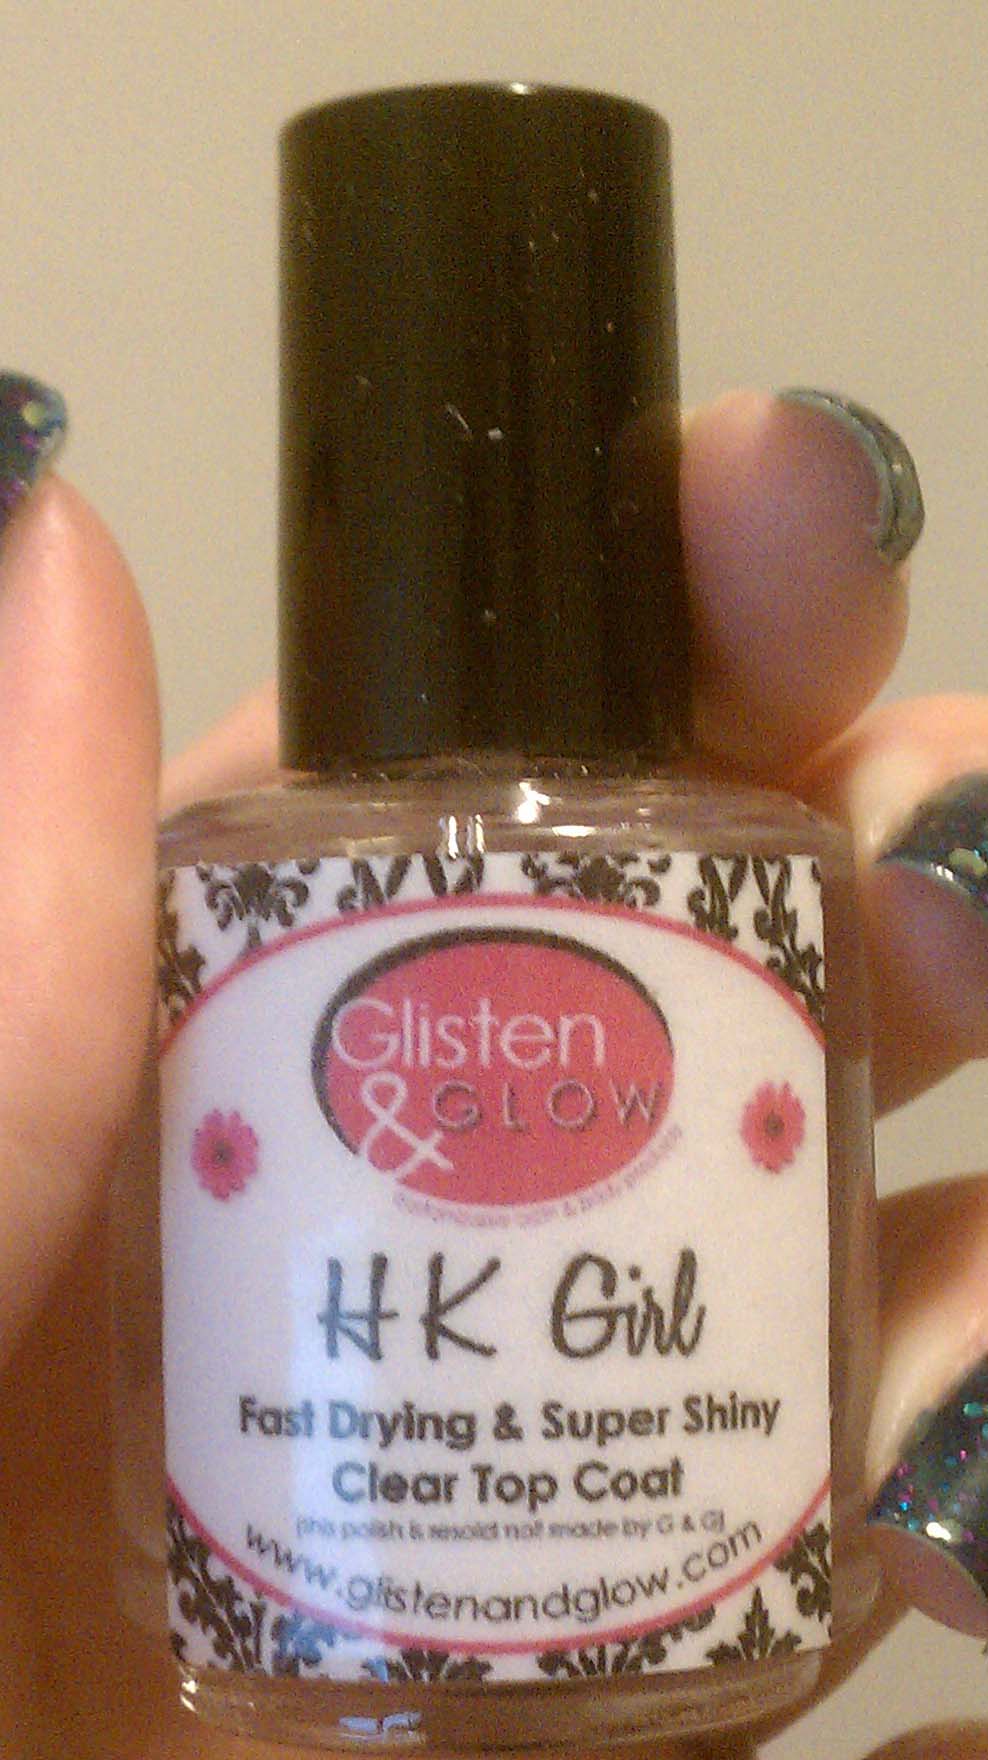 HK Girl Fast Dry & Super Shiny Top Coat Review